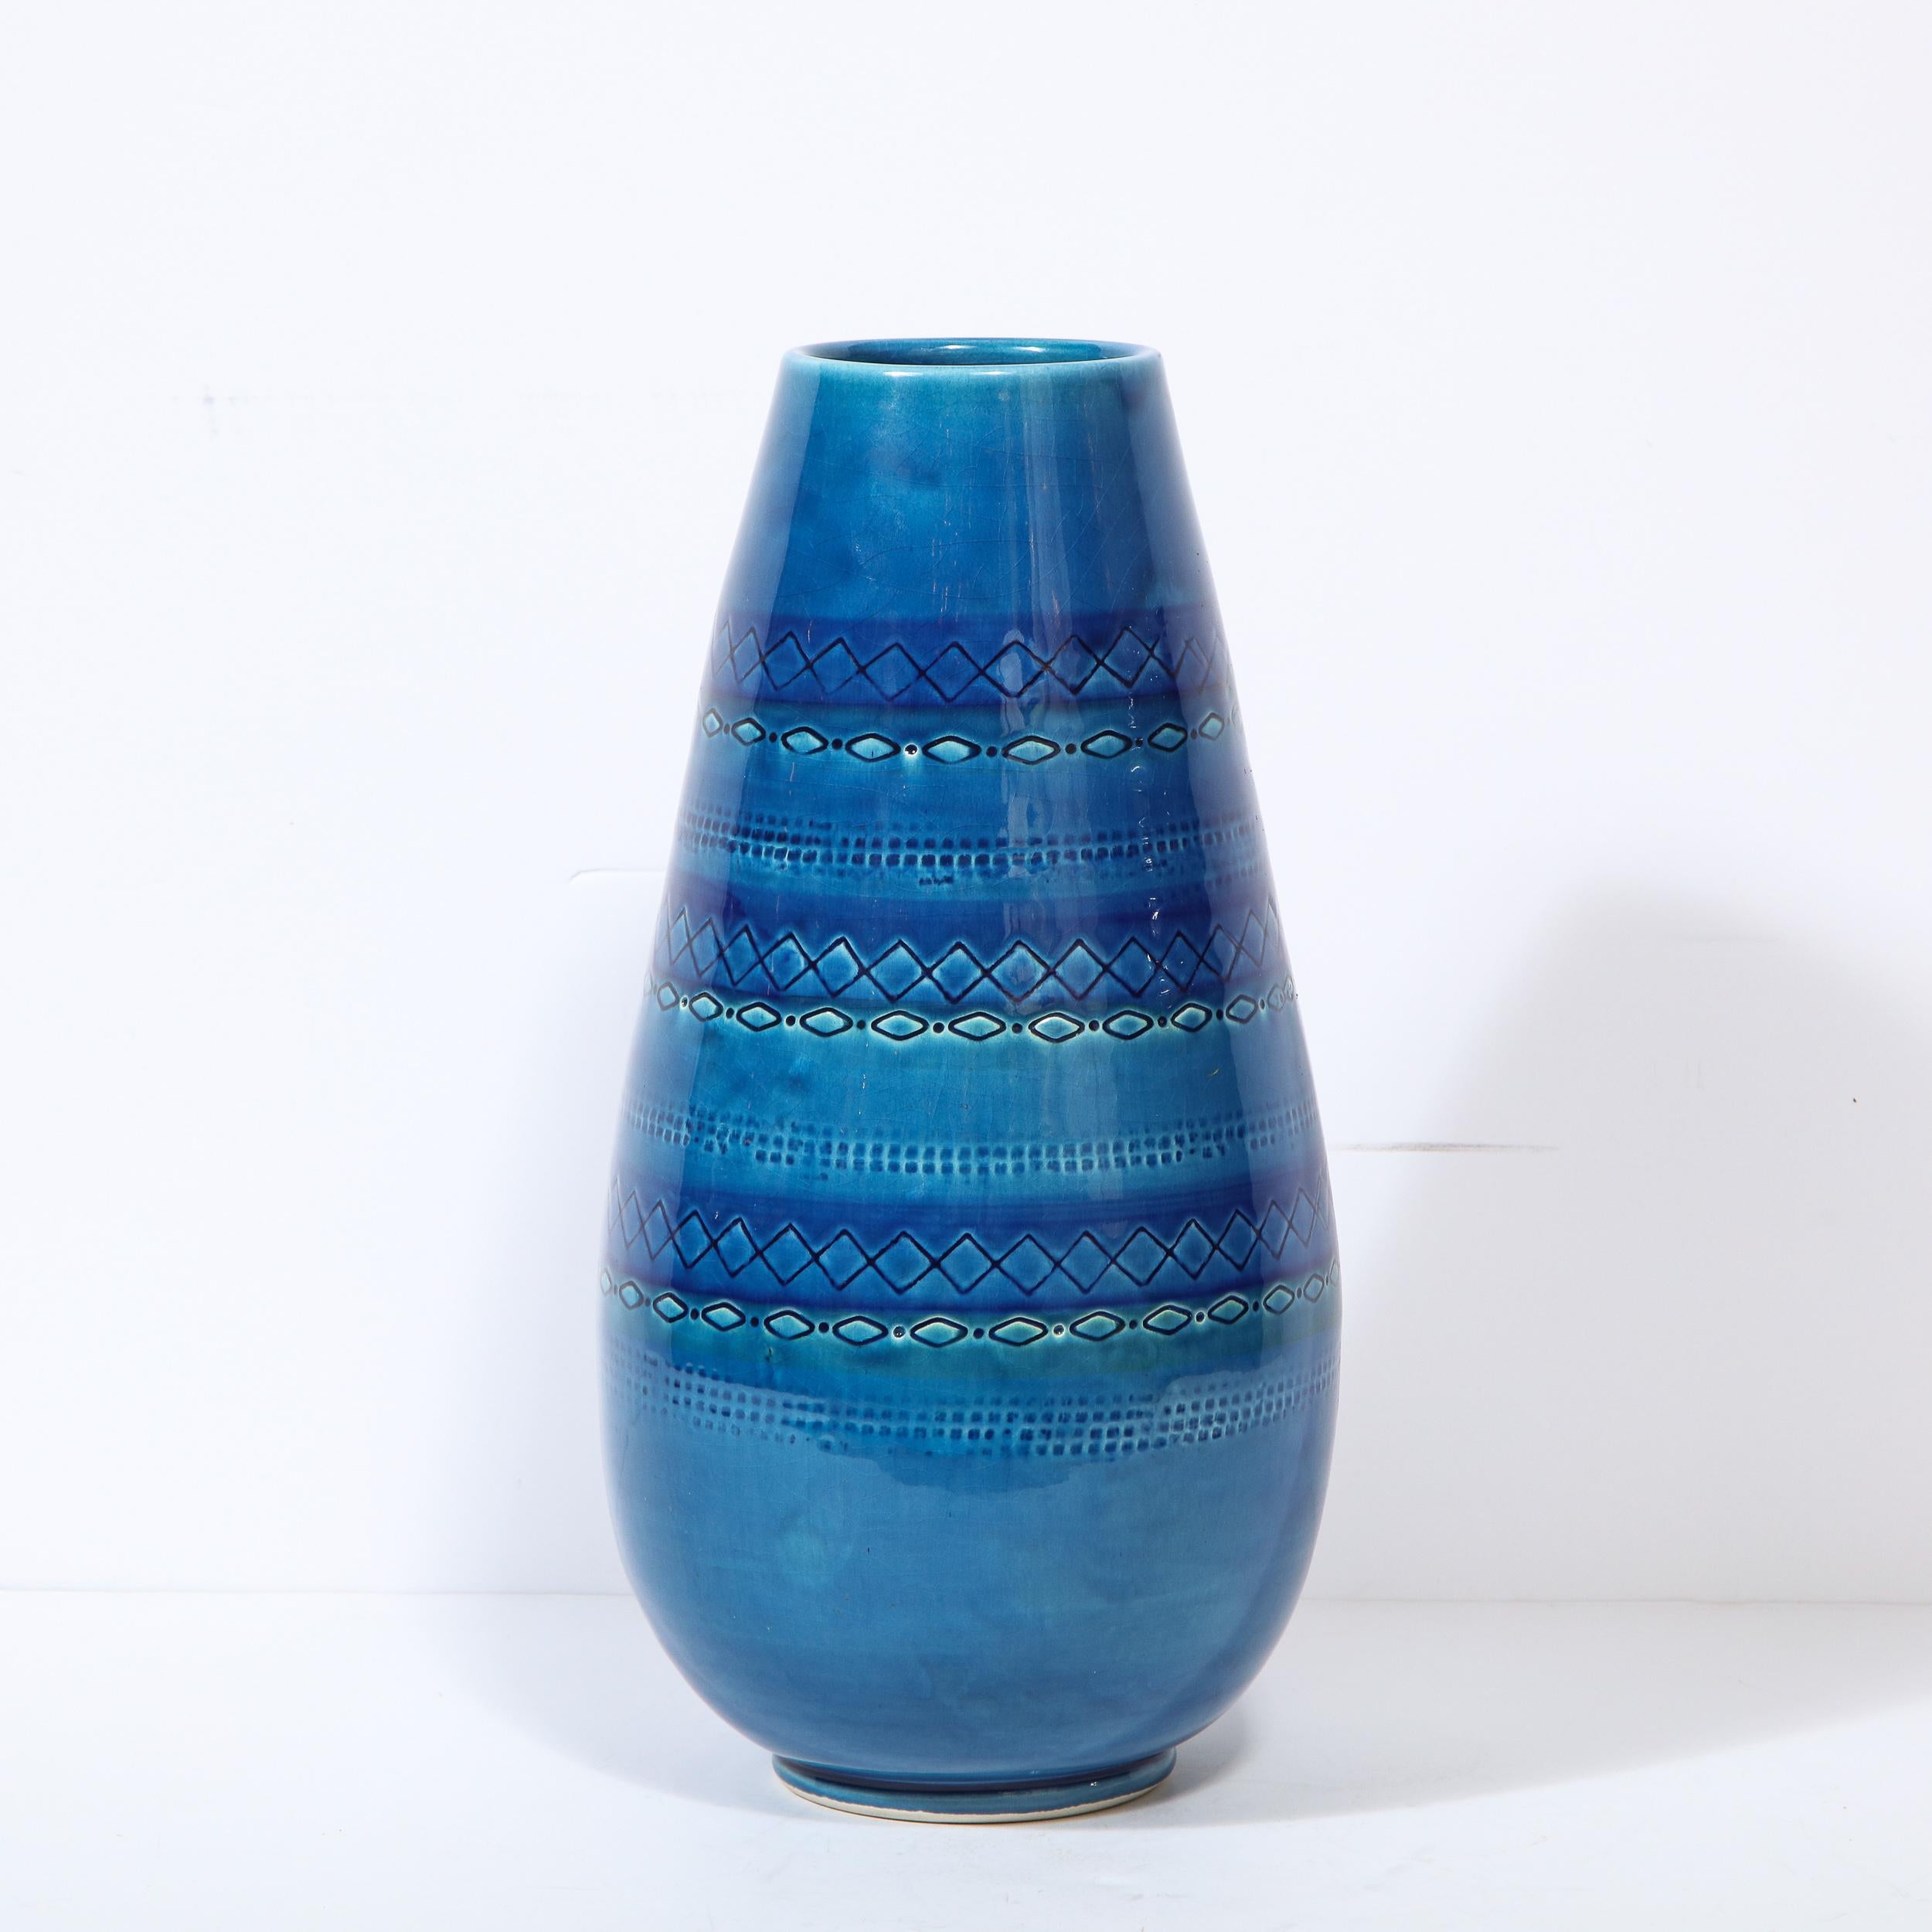 This refined Mid-Century Modern vase was realized in Italy, circa 1960. It offers a conical azure blue body with banded geometric detailing running horizontally across its surface. With its vibrant and sophisticated color, and clean modernist lines,